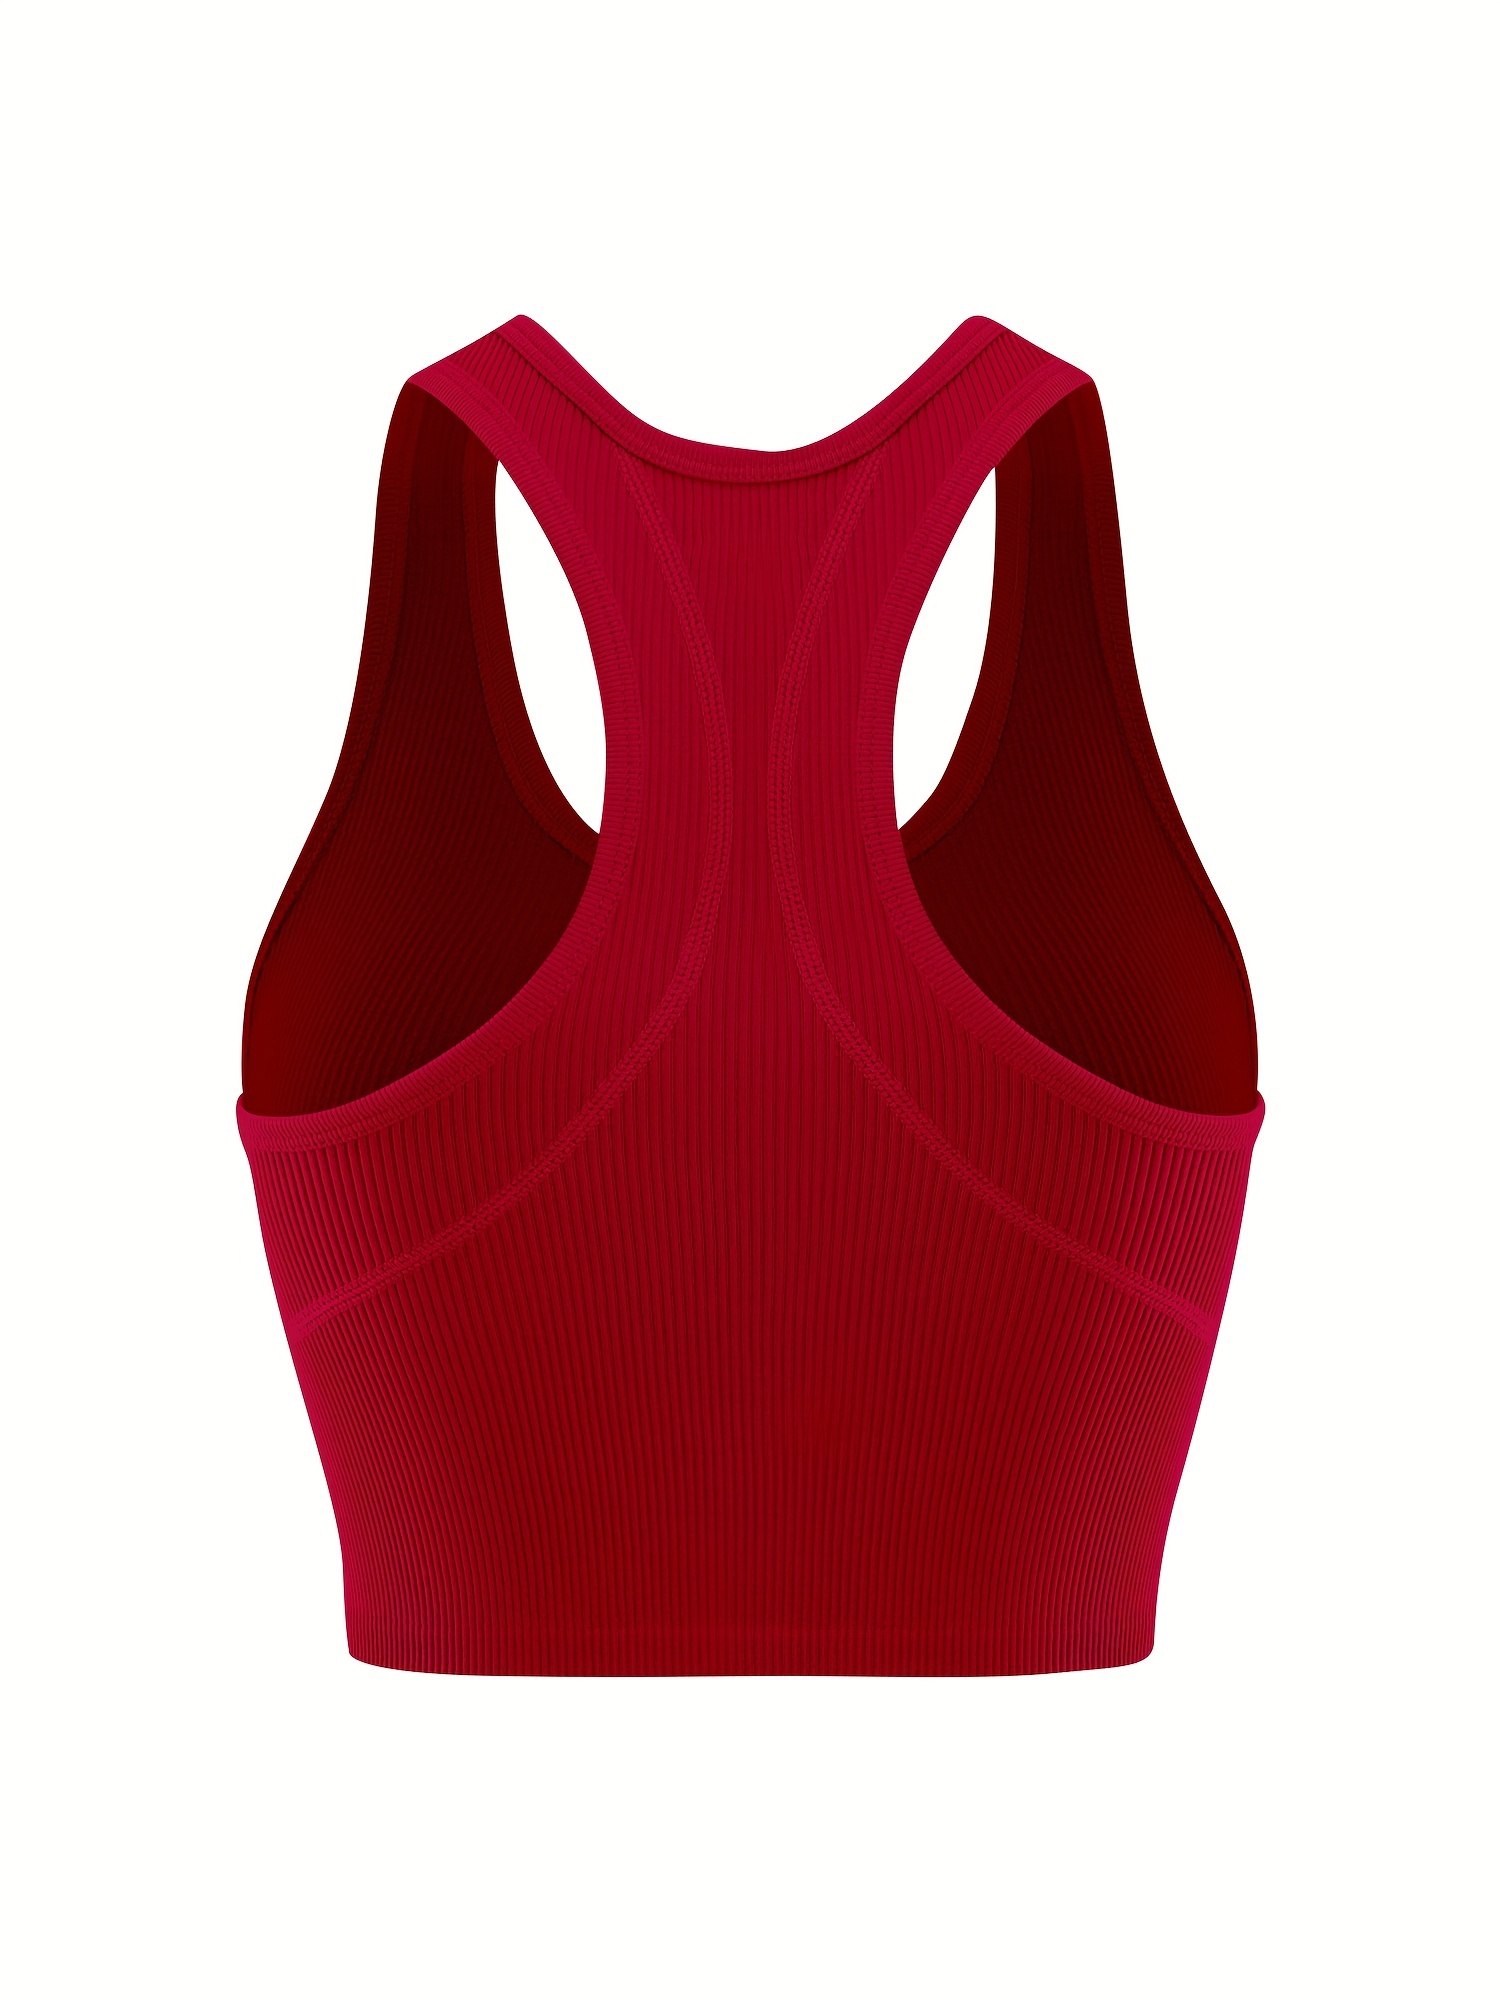 Scyoekwg Sports Bras for Women Girls Teens Comfortable for Gym Yoga Solid  Color Sleeveless Workout Crop Tank Tops Running Yoga Sports Bra Red S